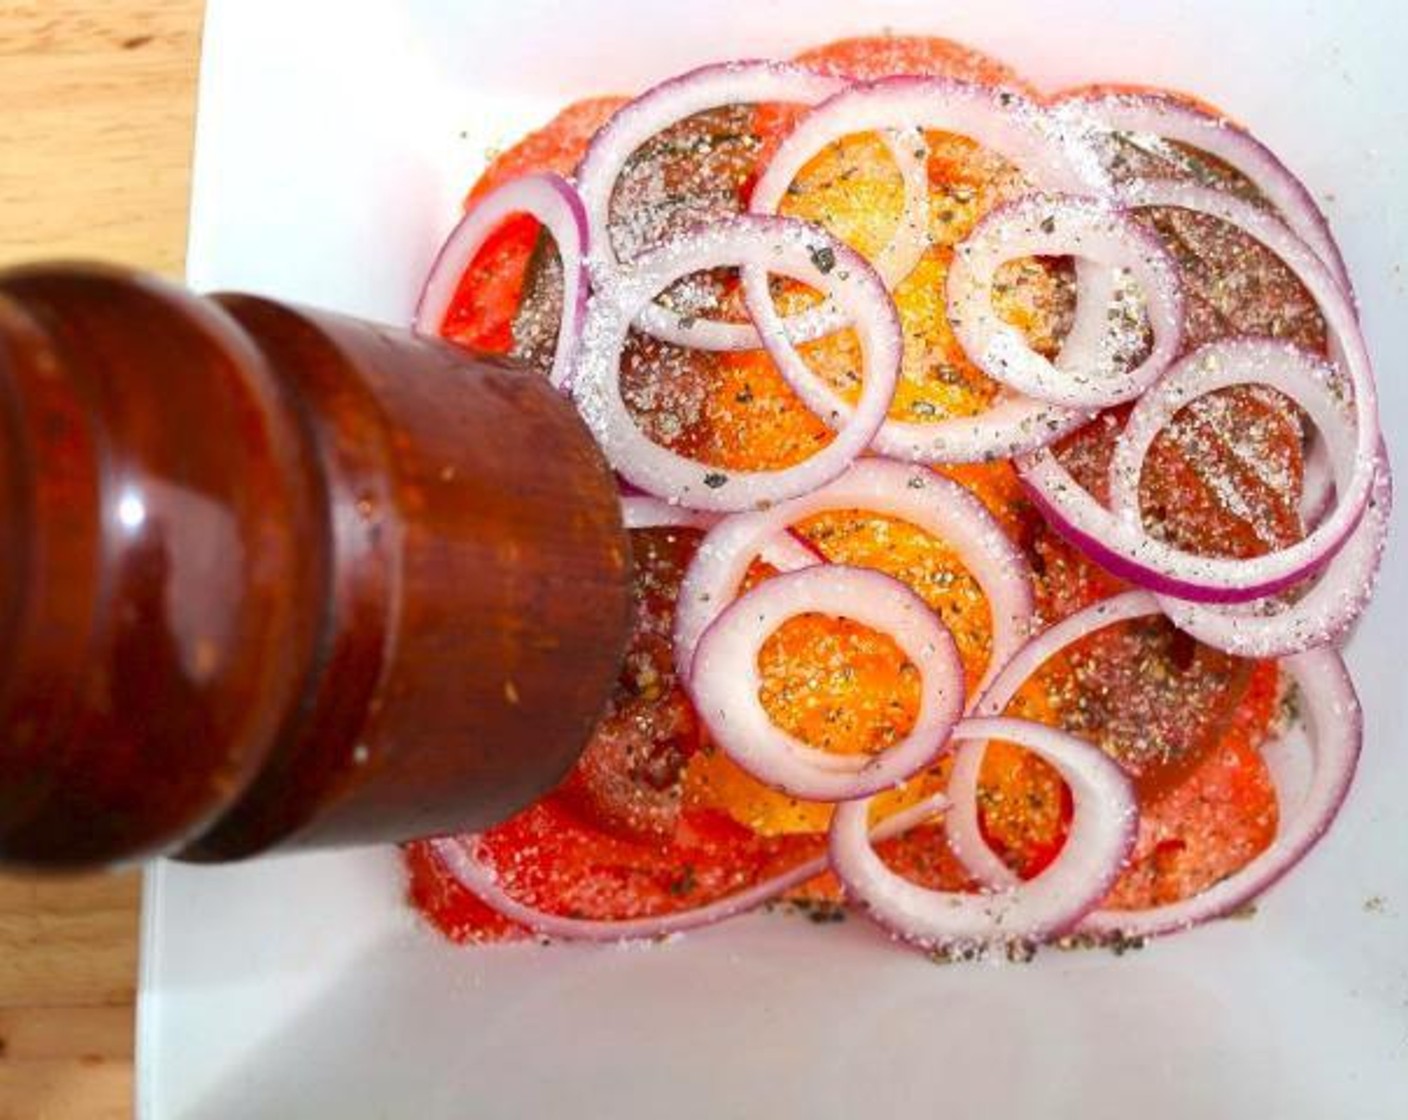 step 6 Top tomatoes with Onions (to taste) rings, season with Kosher Salt (to taste), Finely Ground Black Pepper (to taste), Extra-Virgin Olive Oil (as needed), and White Balsamic Vinegar (to taste) marinade for at least 2 hours.